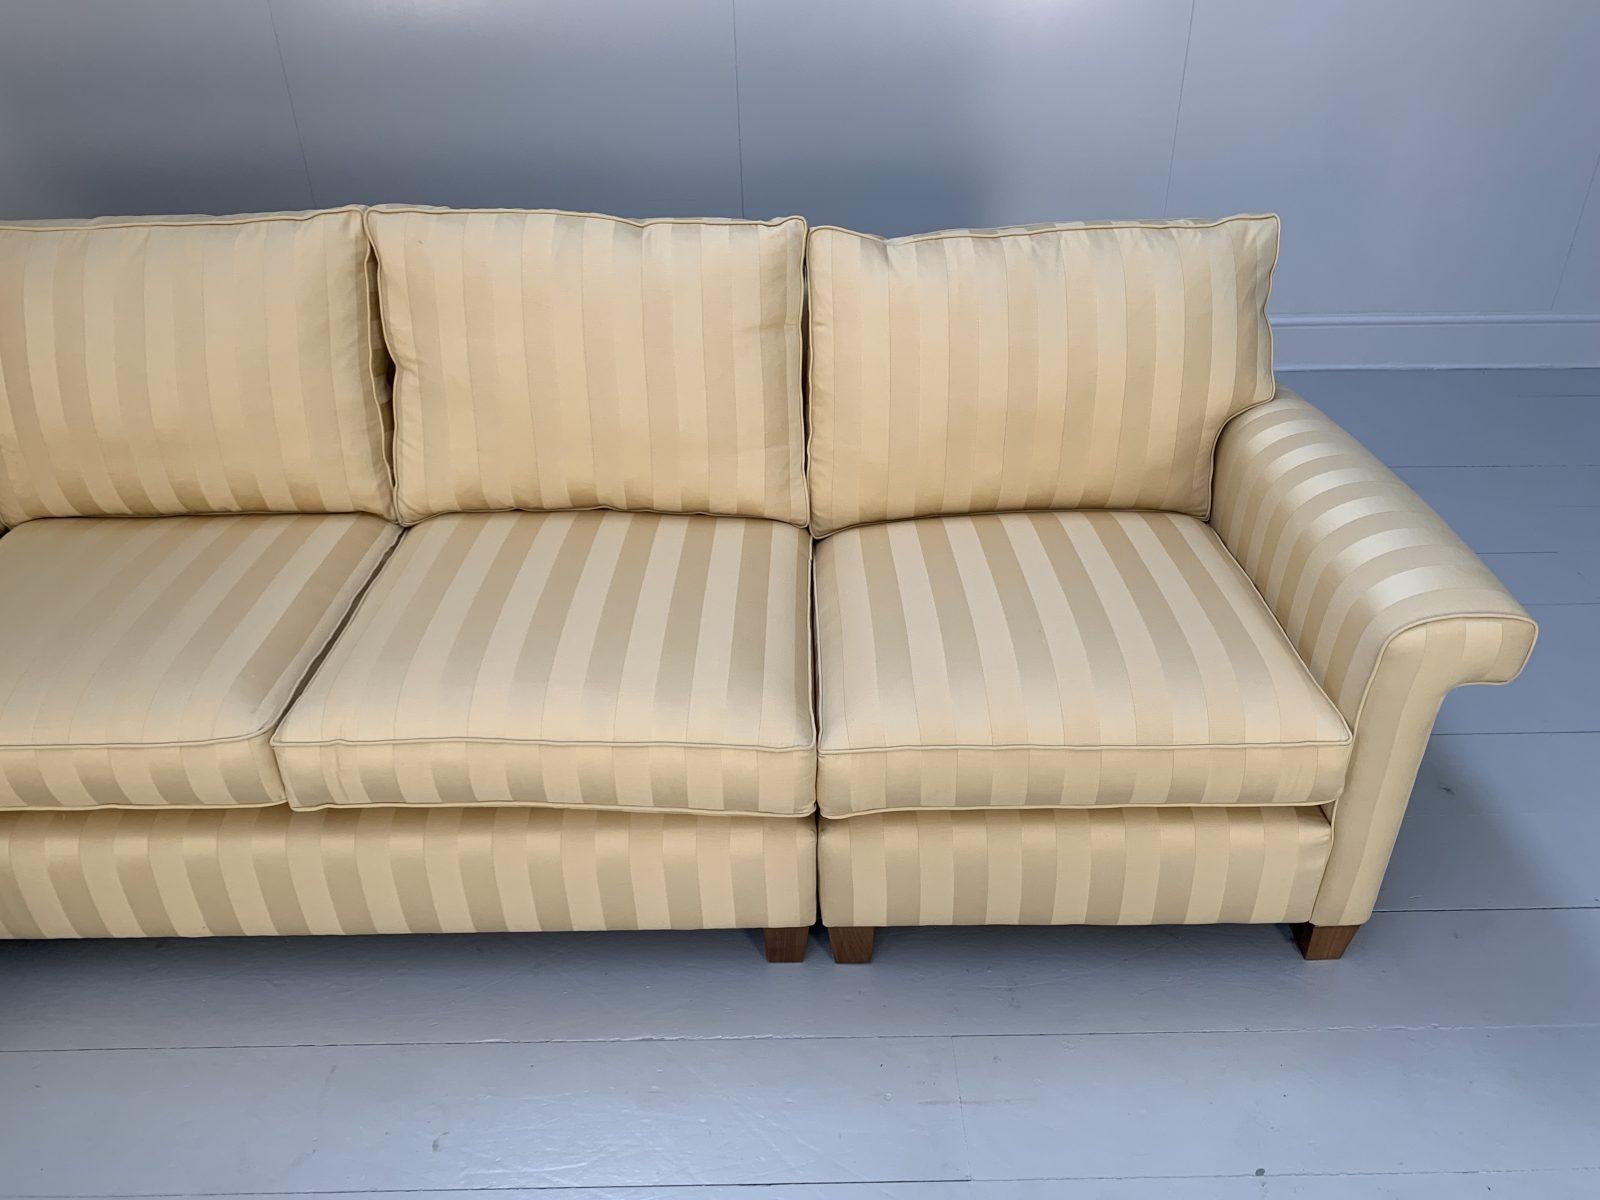 Duresta “Haywood” 4-Seat L-Shape Sofa – In Gold Stripe Fabric In Good Condition For Sale In Barrowford, GB